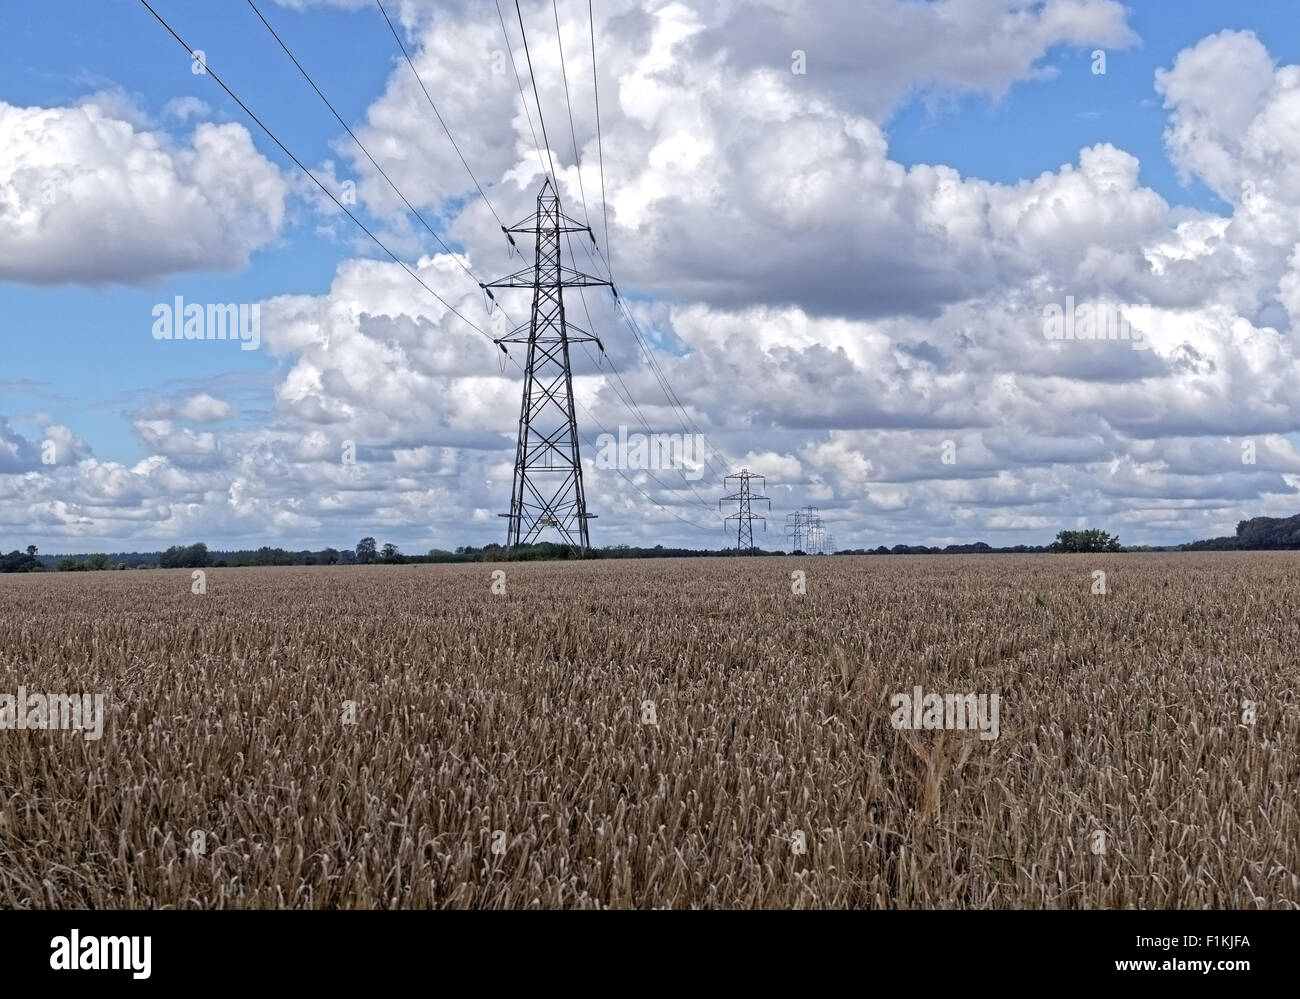 electricity pylons over a ripe corn crop. Stock Photo